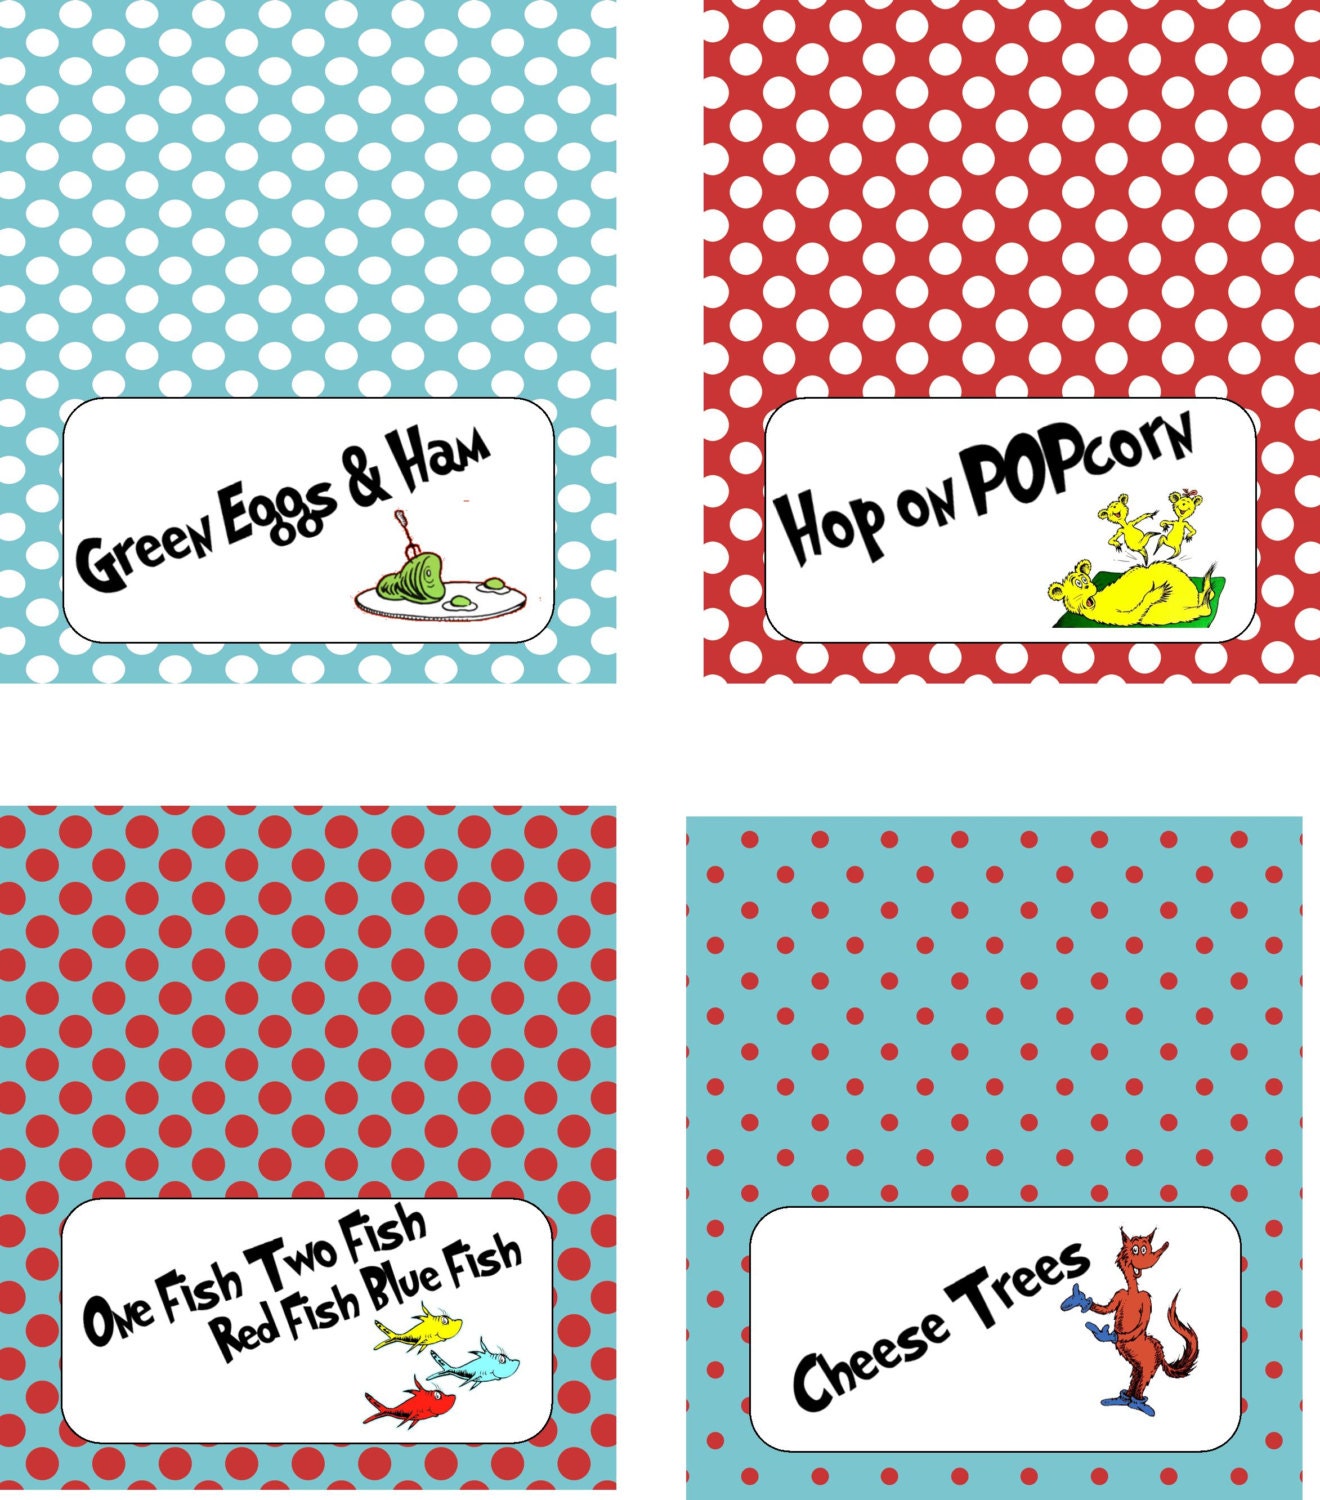 Dr Seuss Party Food Tent LabelsPrintable by CarolinaInvites